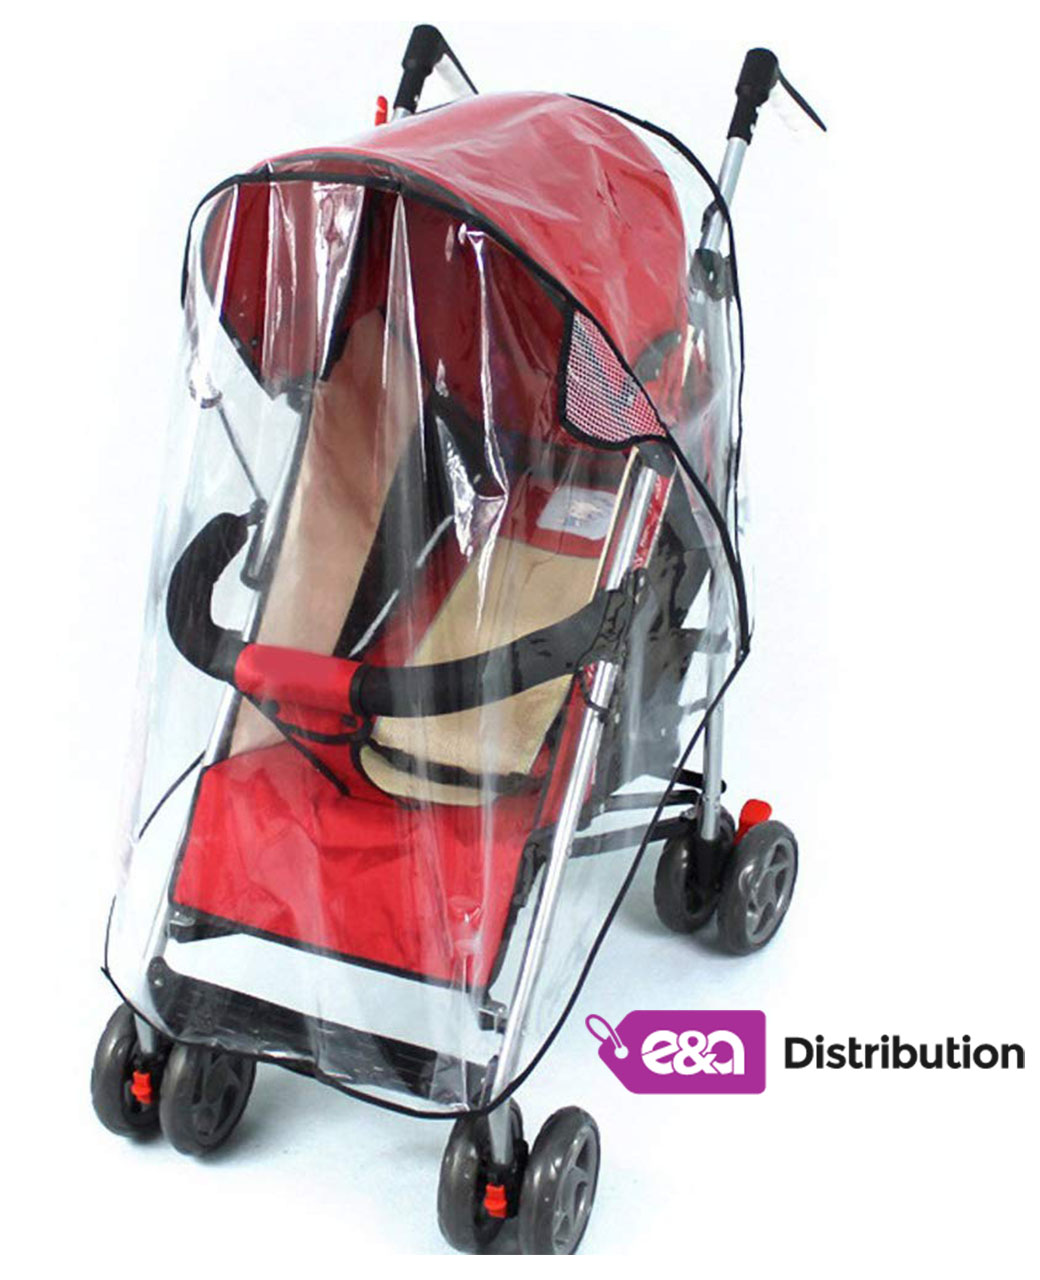 pushchair cover